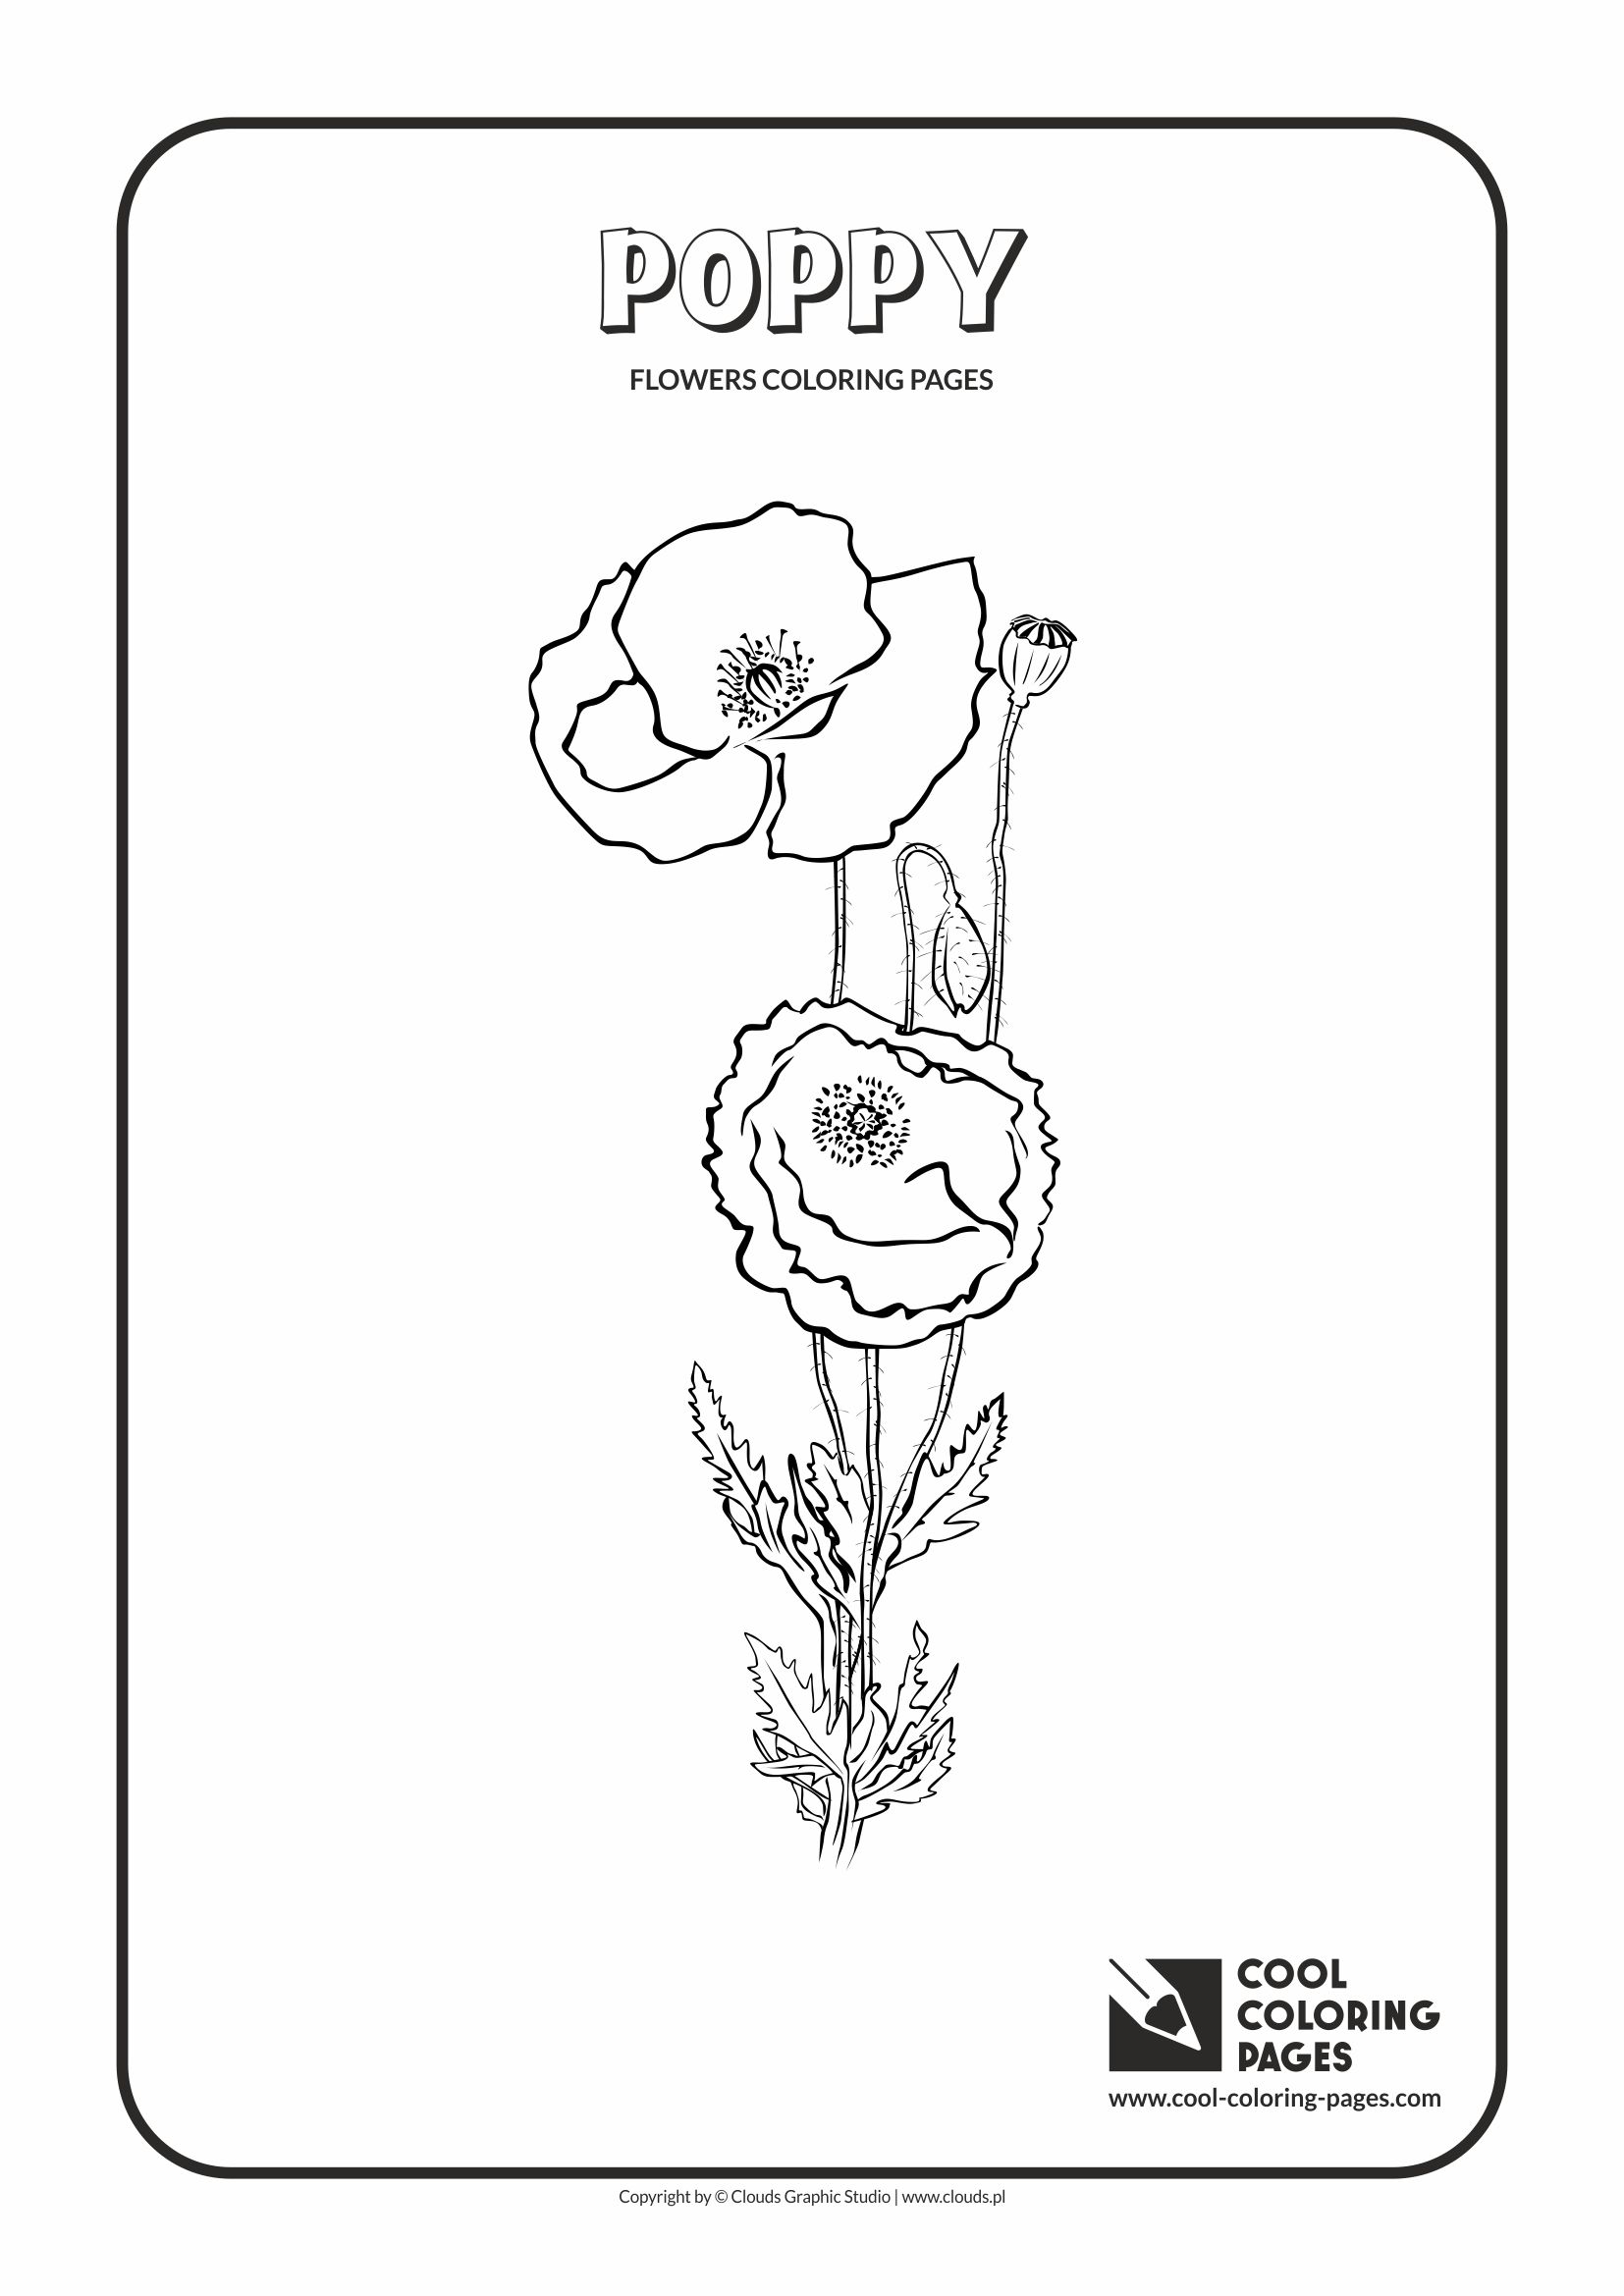 Cool Coloring Pages - Plants / Poppy / Coloring page with poppy